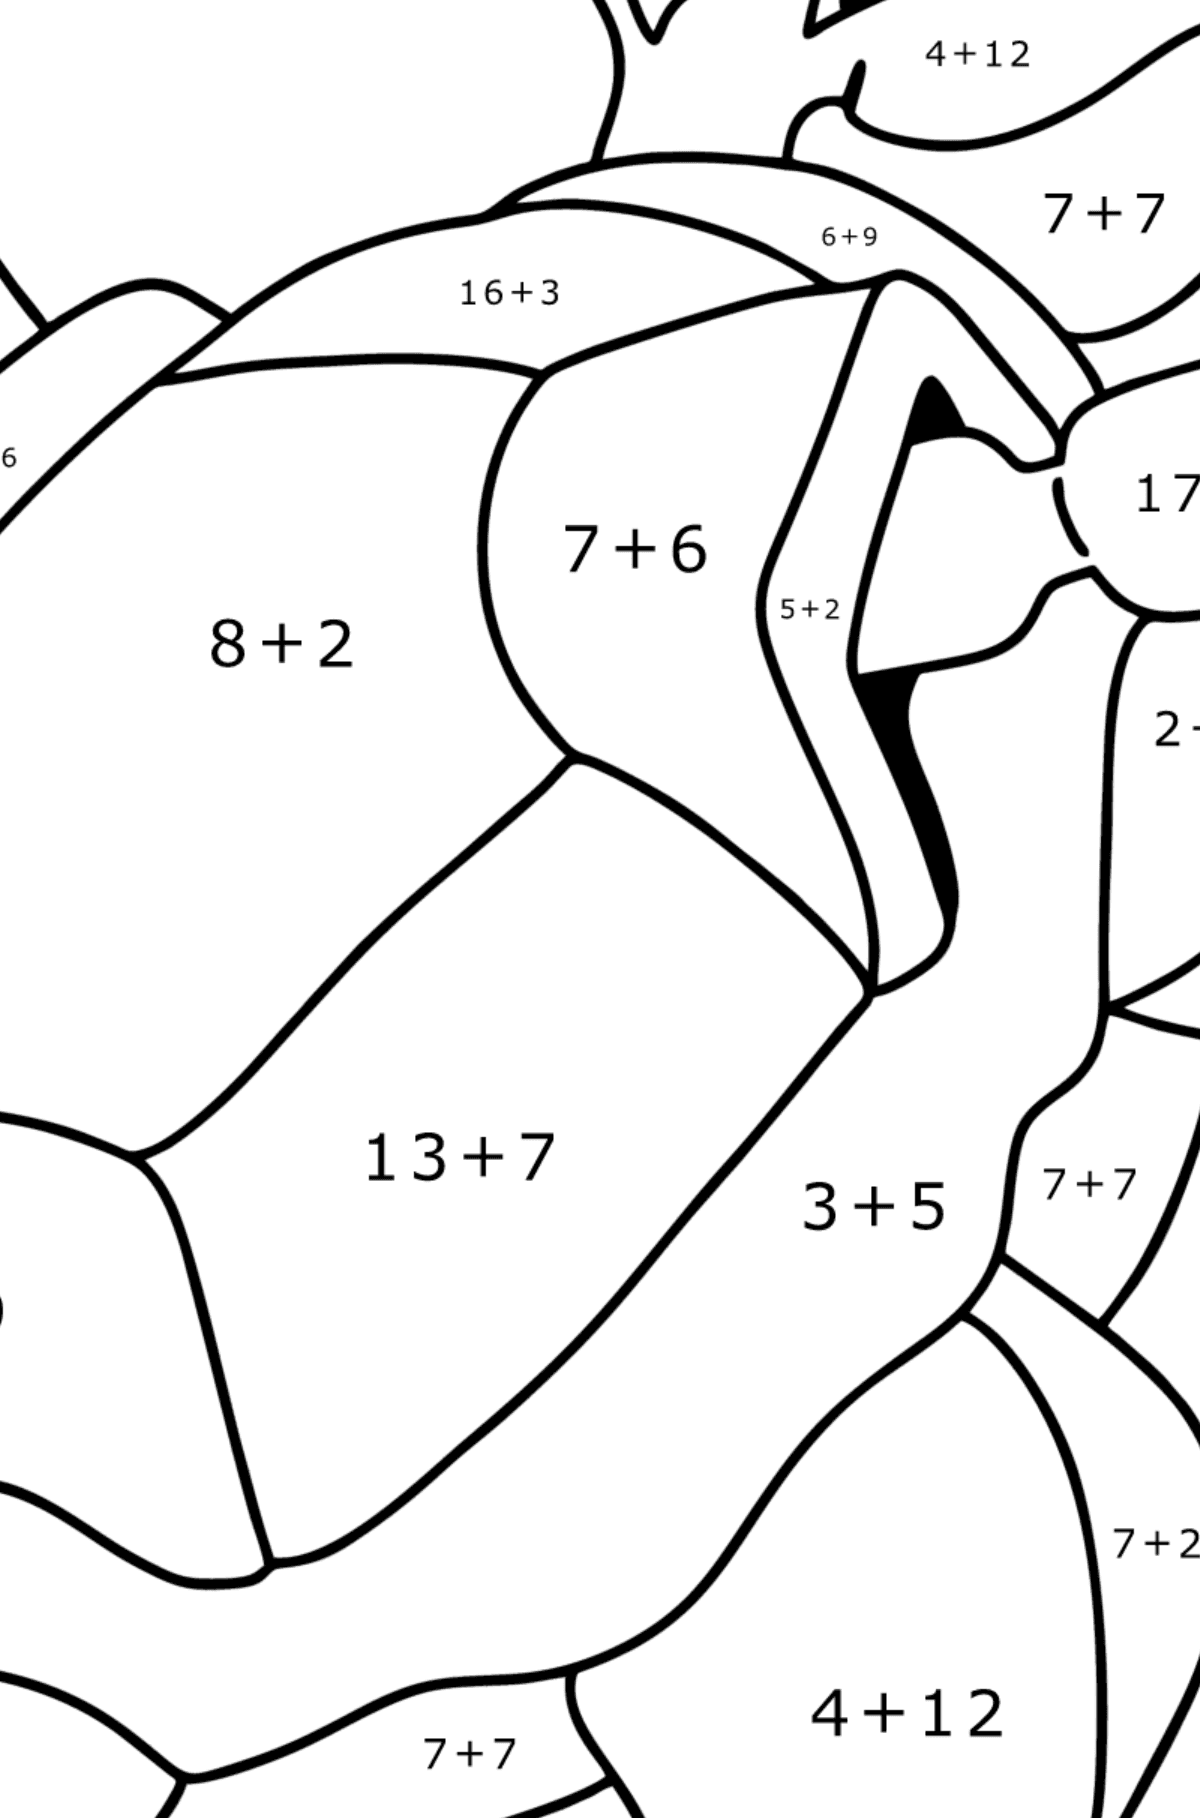 Pokémon Go Blastoise coloring page - Math Coloring - Addition for Kids